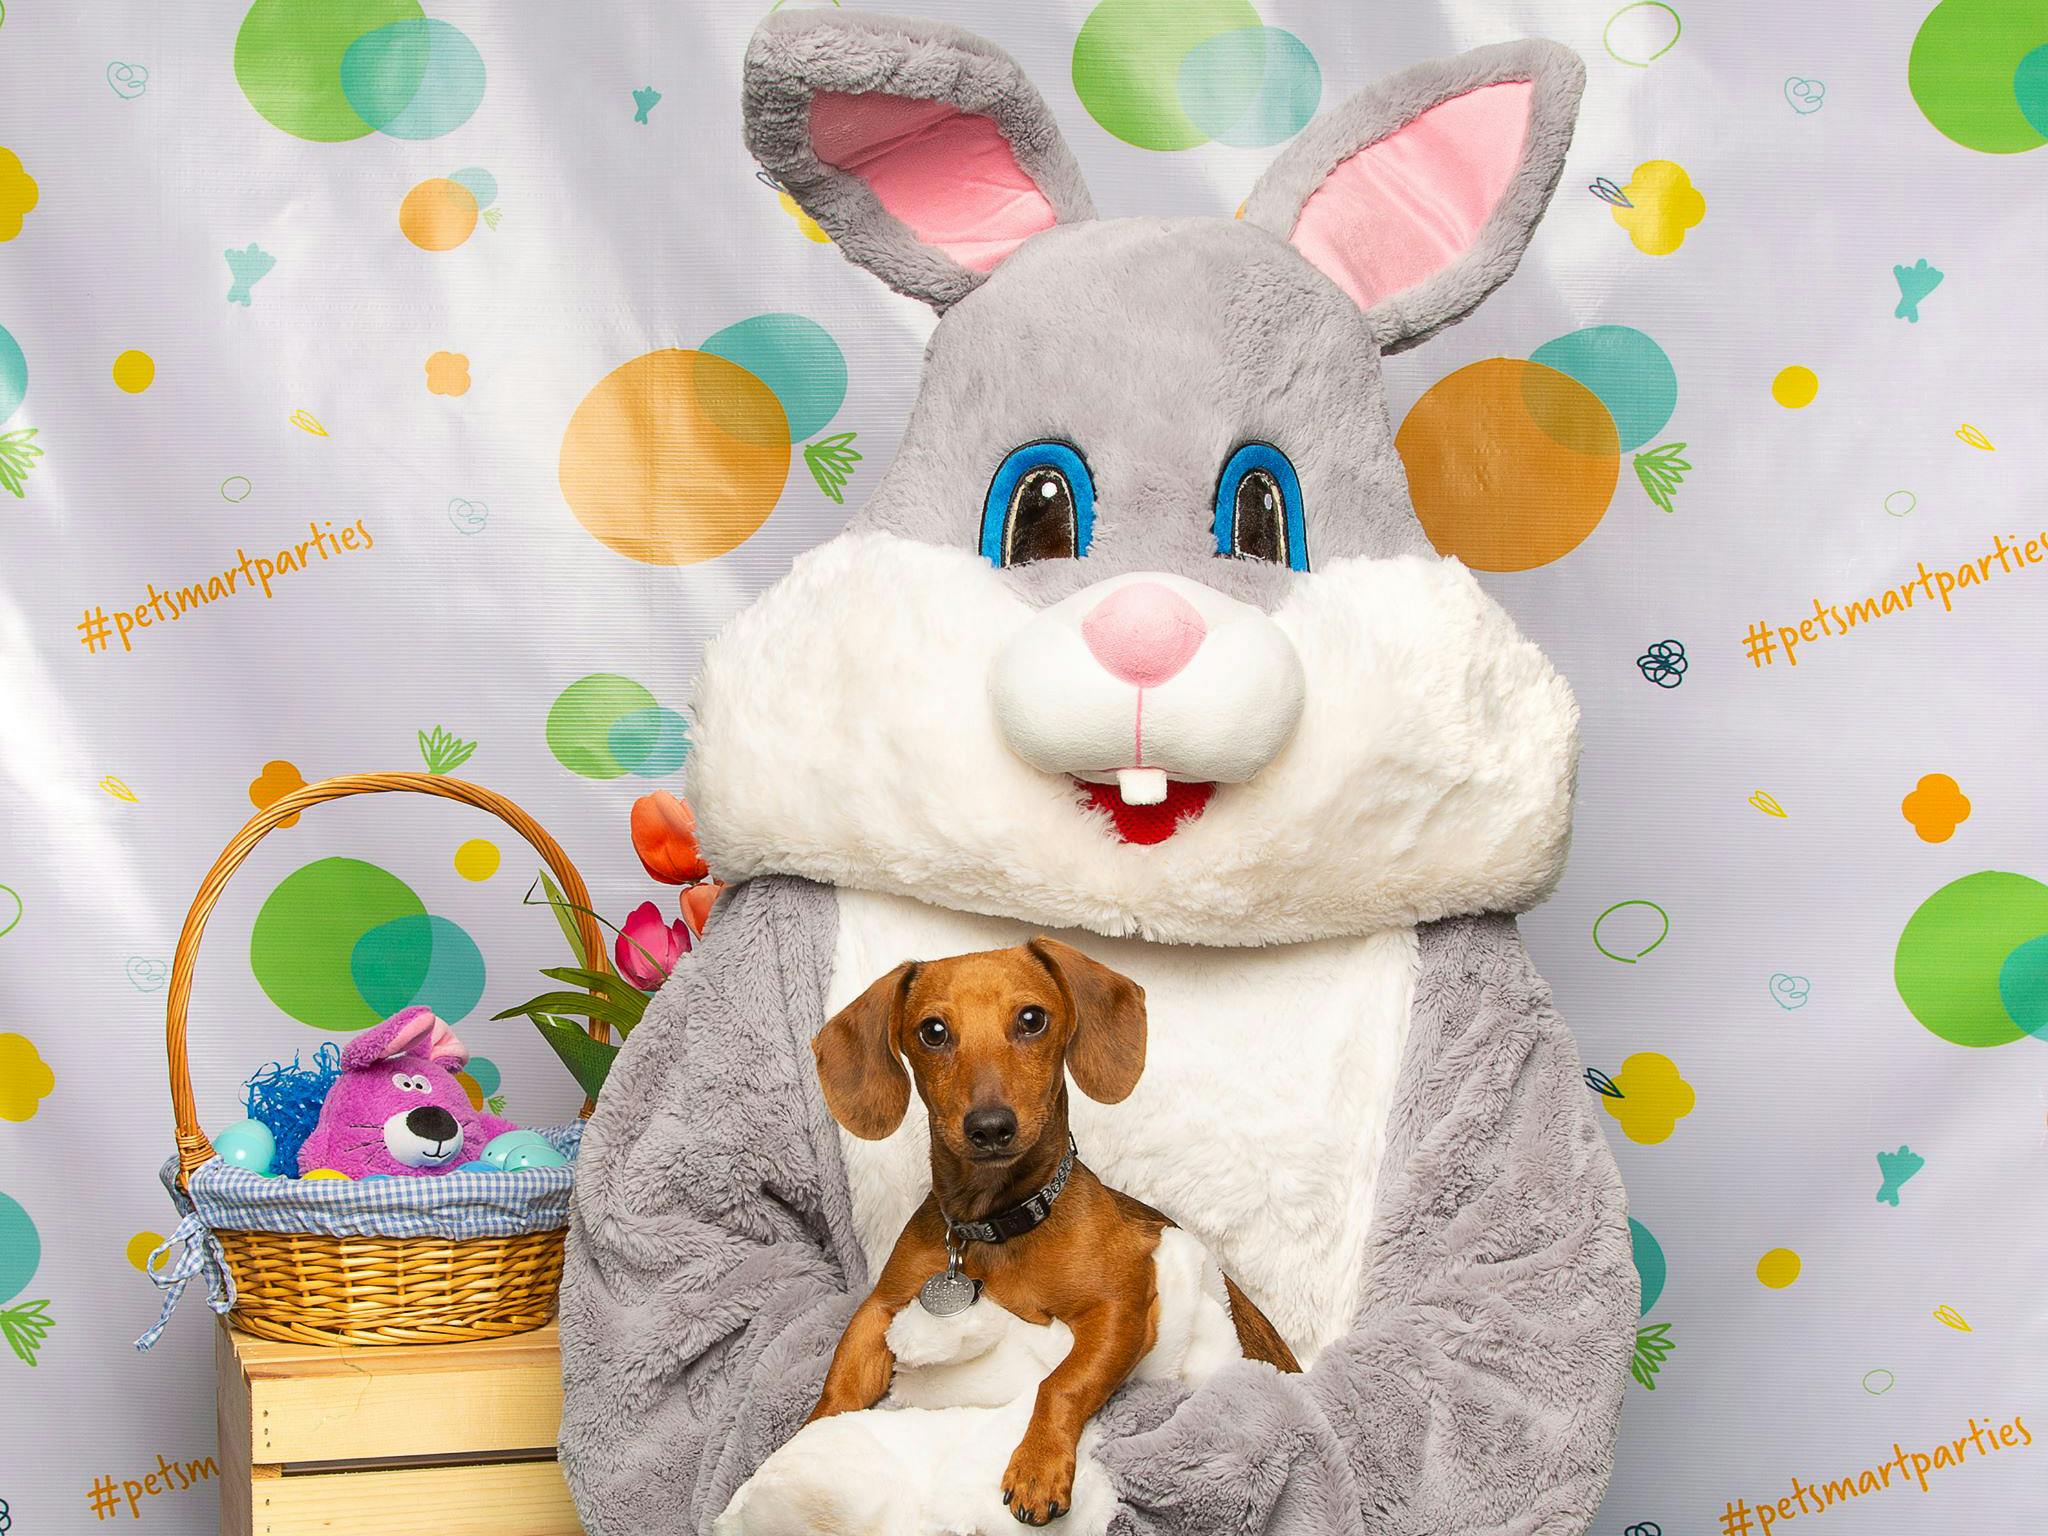 A dog in the lap of an Easter Bunny at a PetSmart event